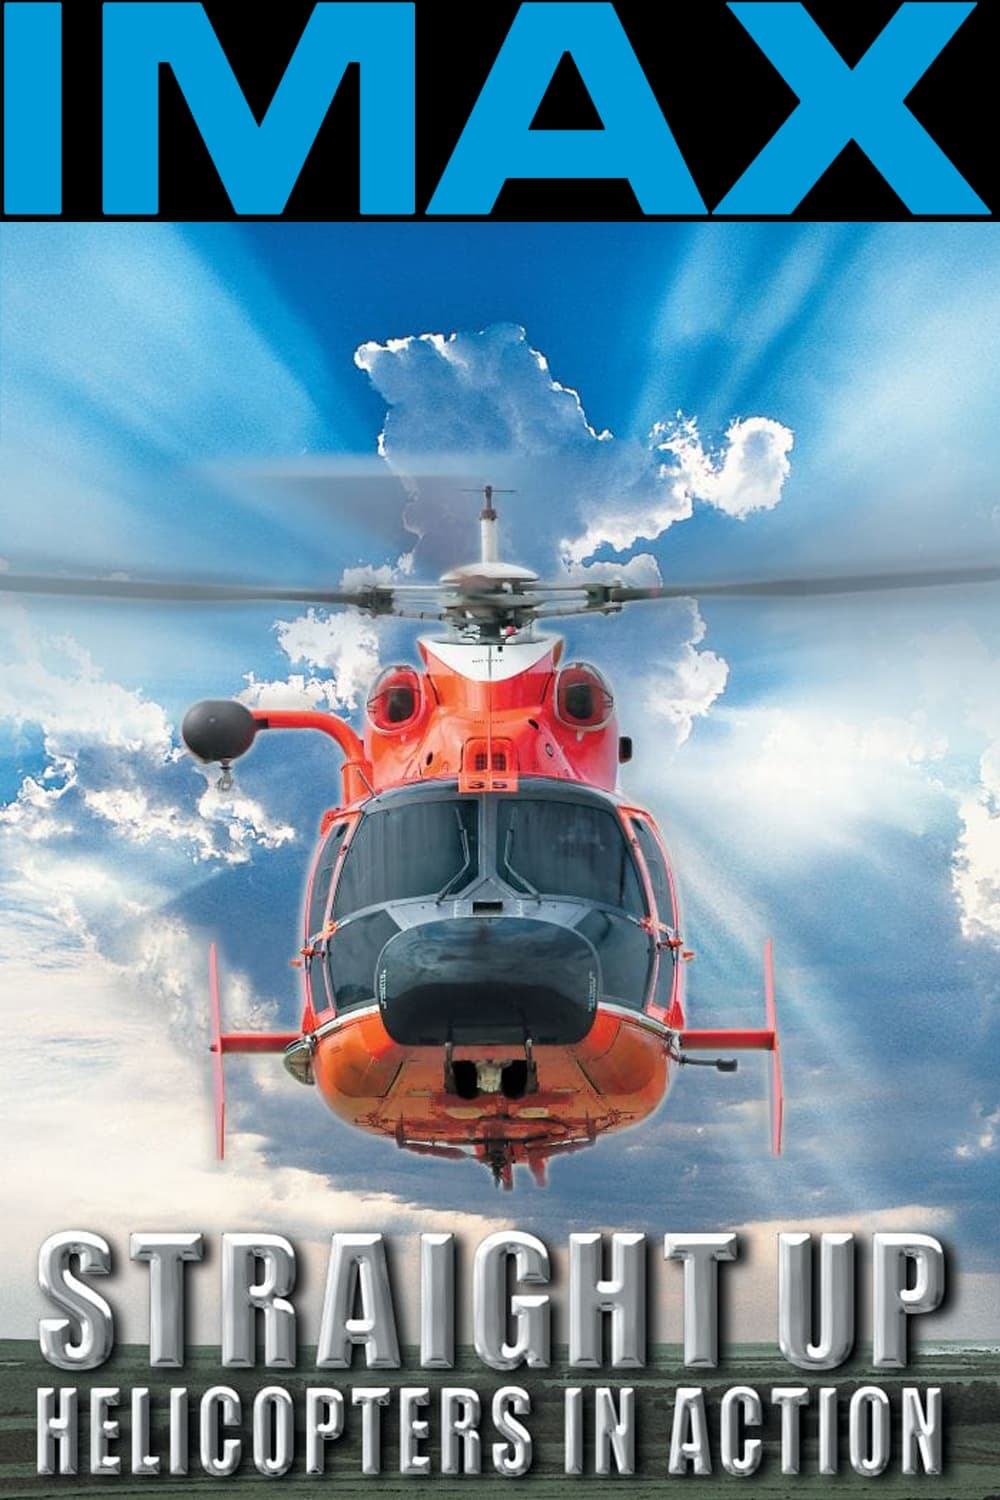 IMAX - Straight Up, Helicopters in Action (2002)